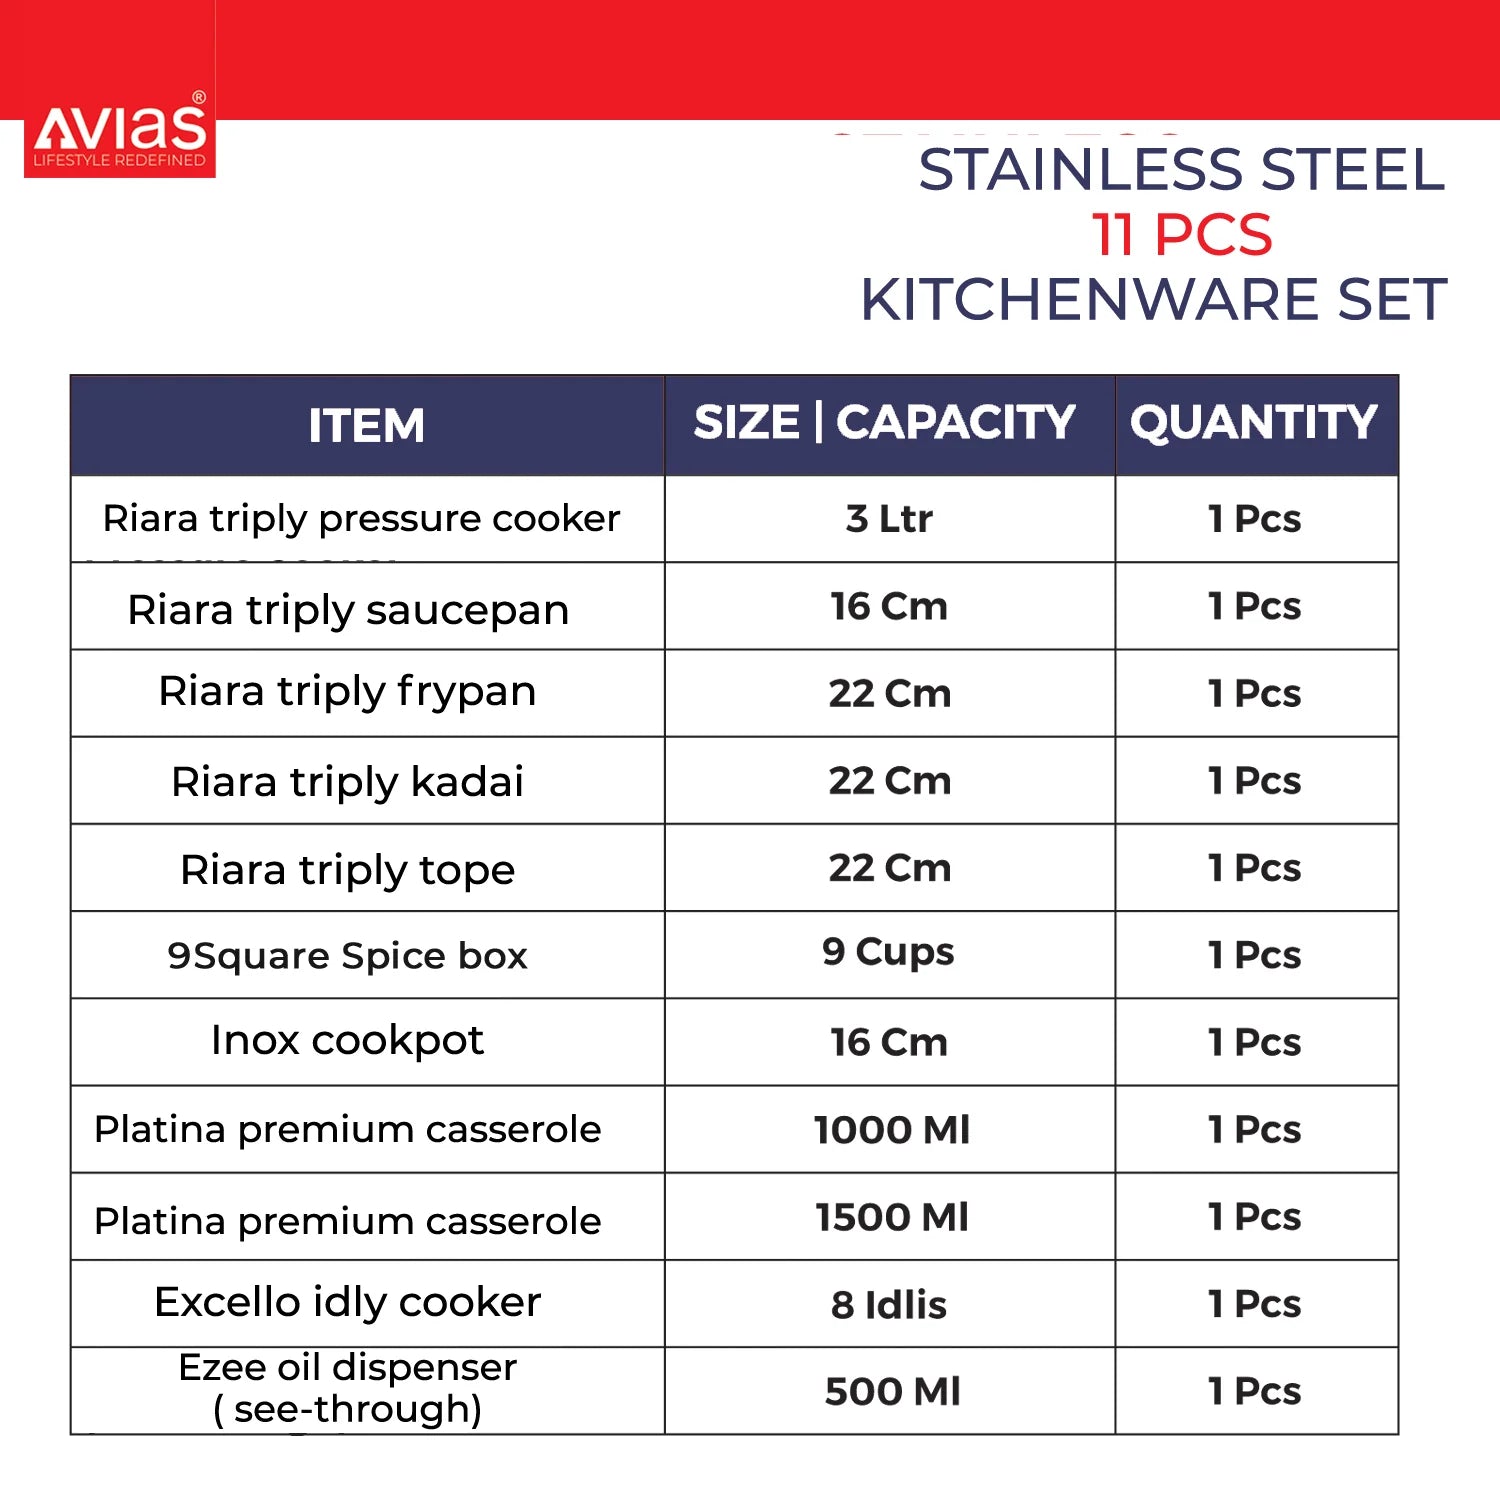 Best Stainless Steel Kitchenware sets 11 Pieces size and quantity